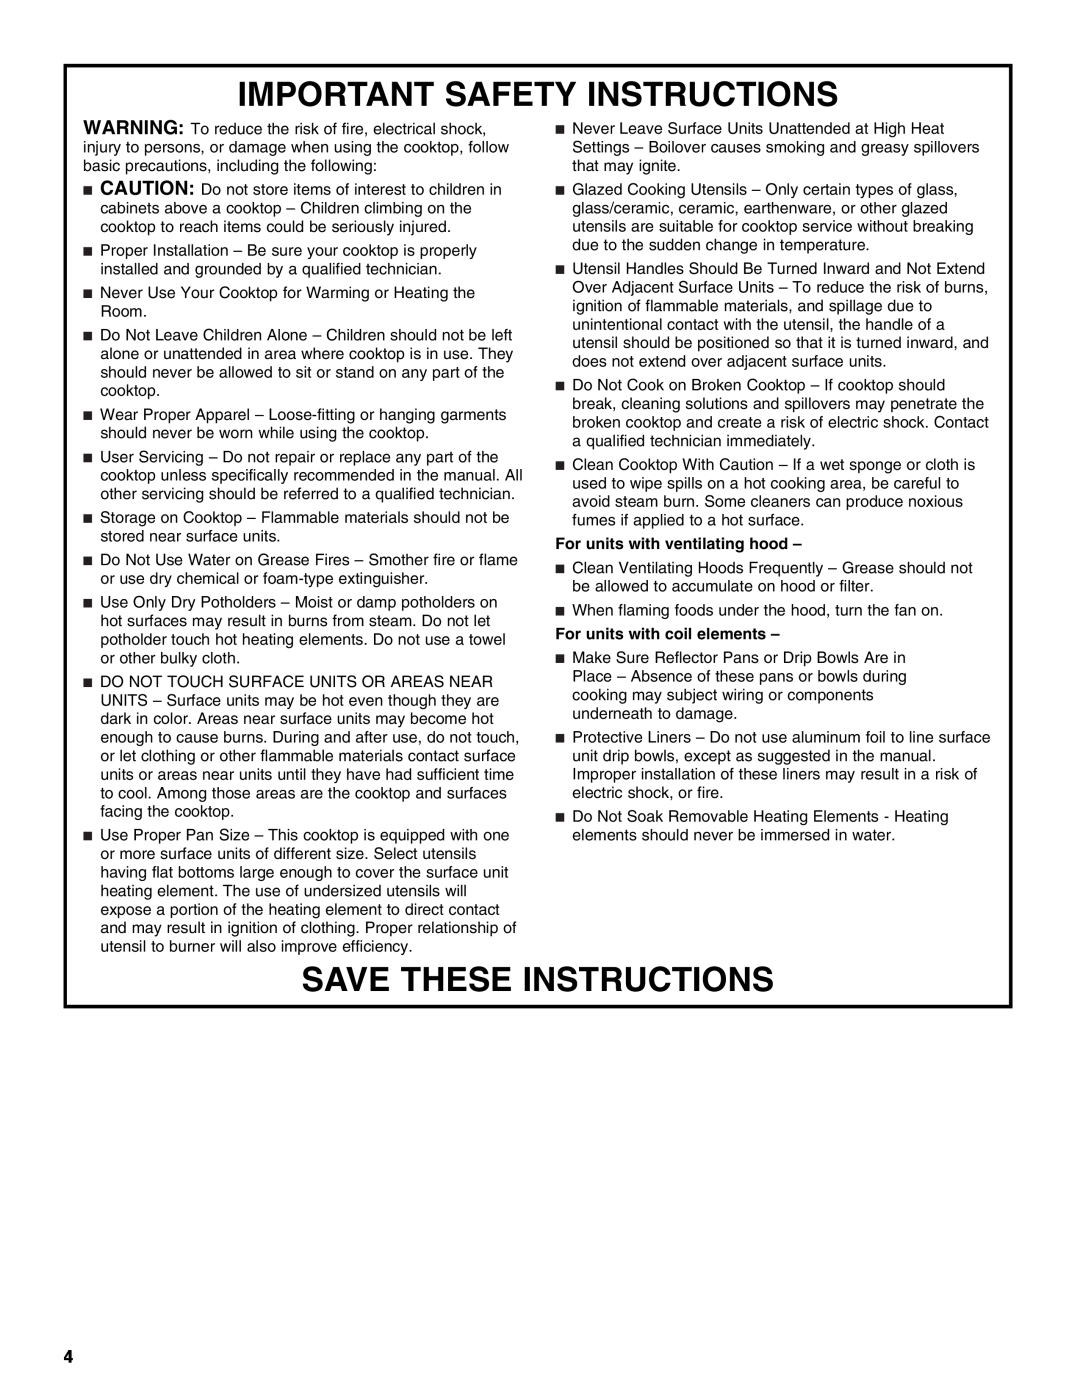 Maytag W10274254C manual Important Safety Instructions, Save These Instructions, For units with ventilating hood 